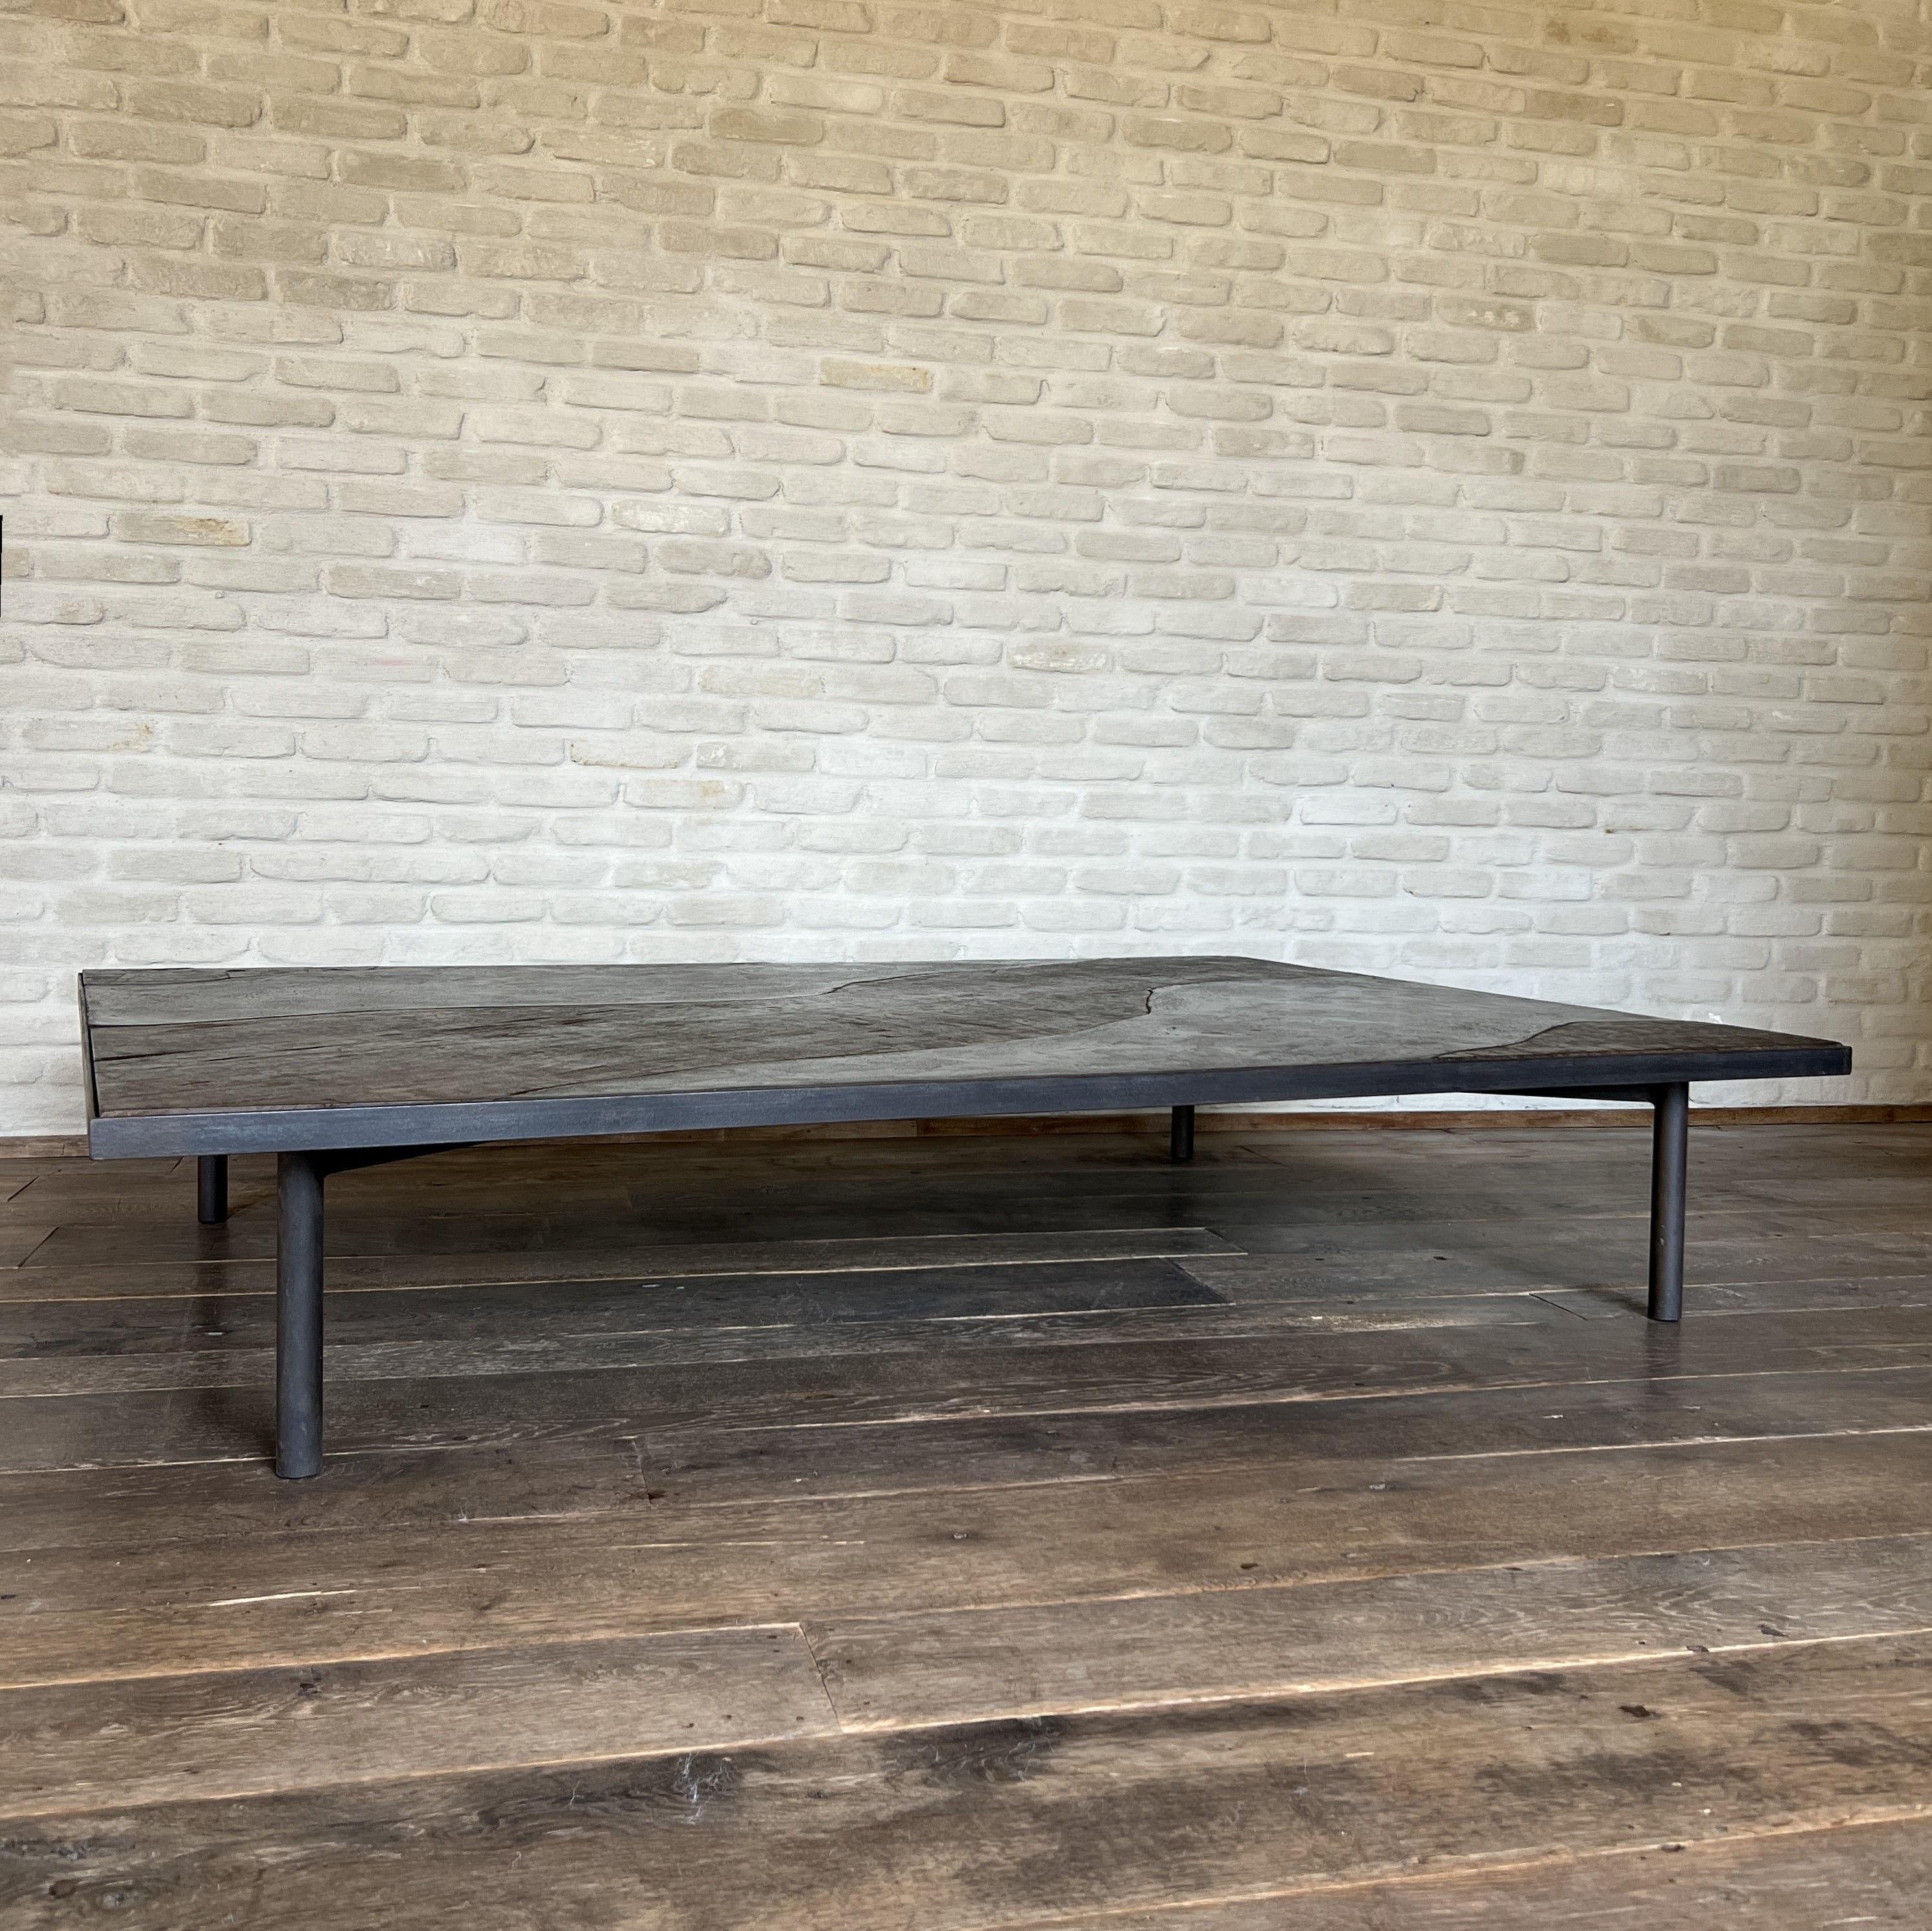 Our LUNA coffeetable with 18th century walnut and marbleplaster on a custom iron frame.